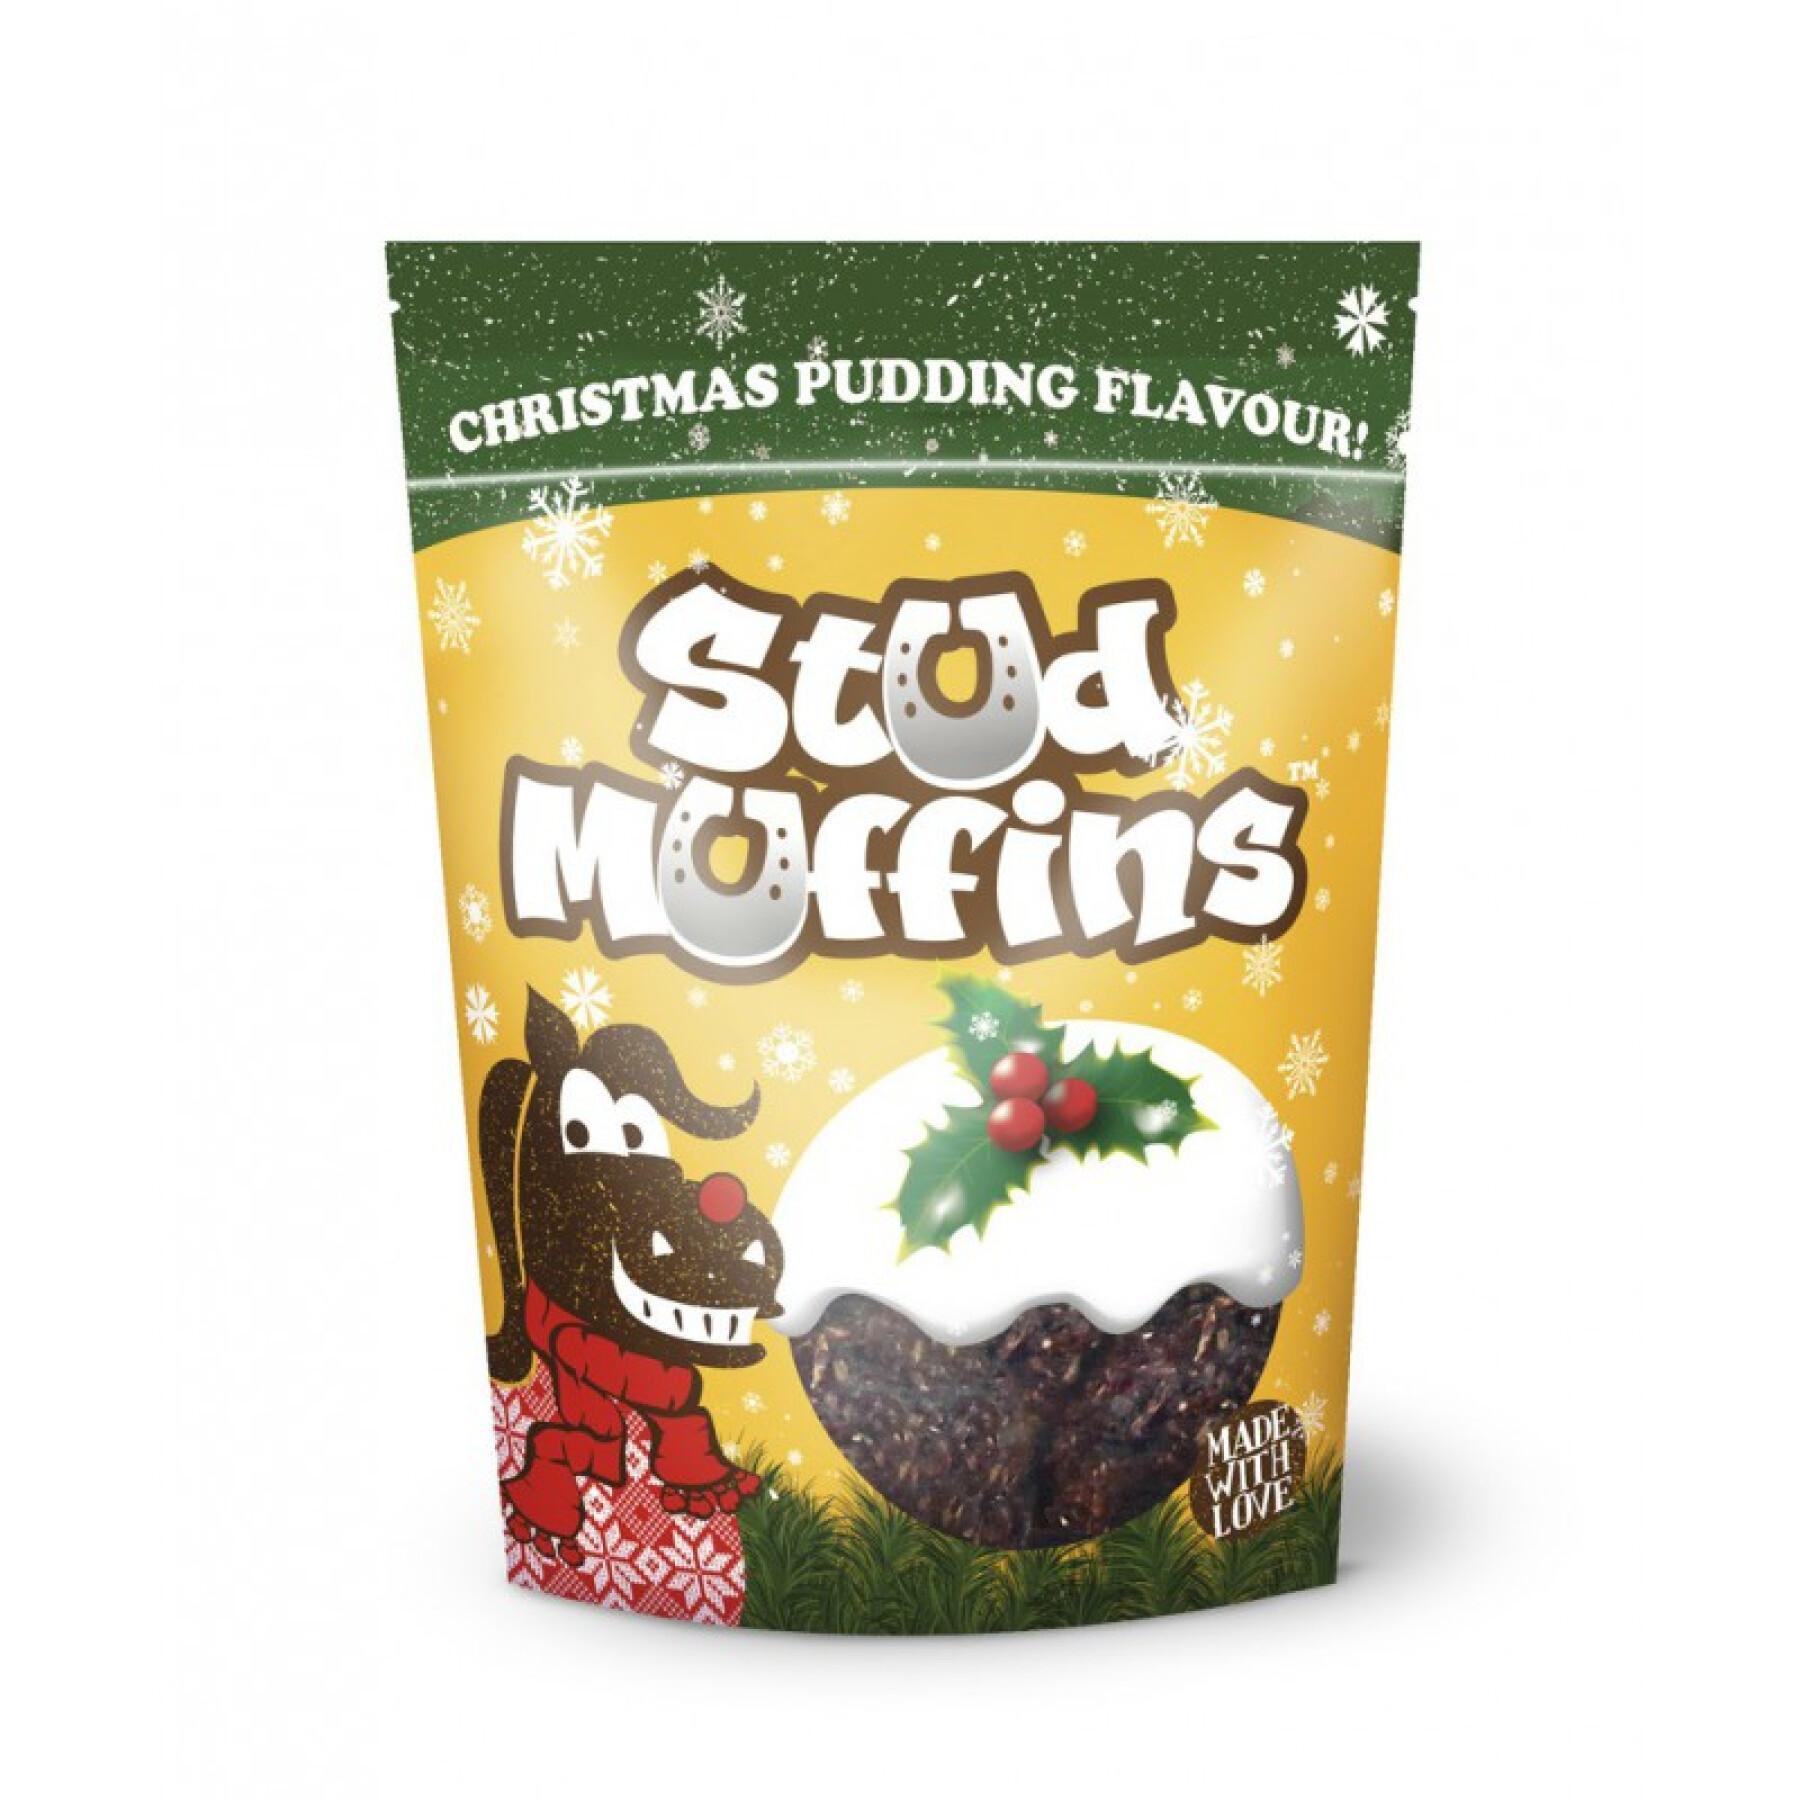 Sweets Stud Muffins Xmas Pudding